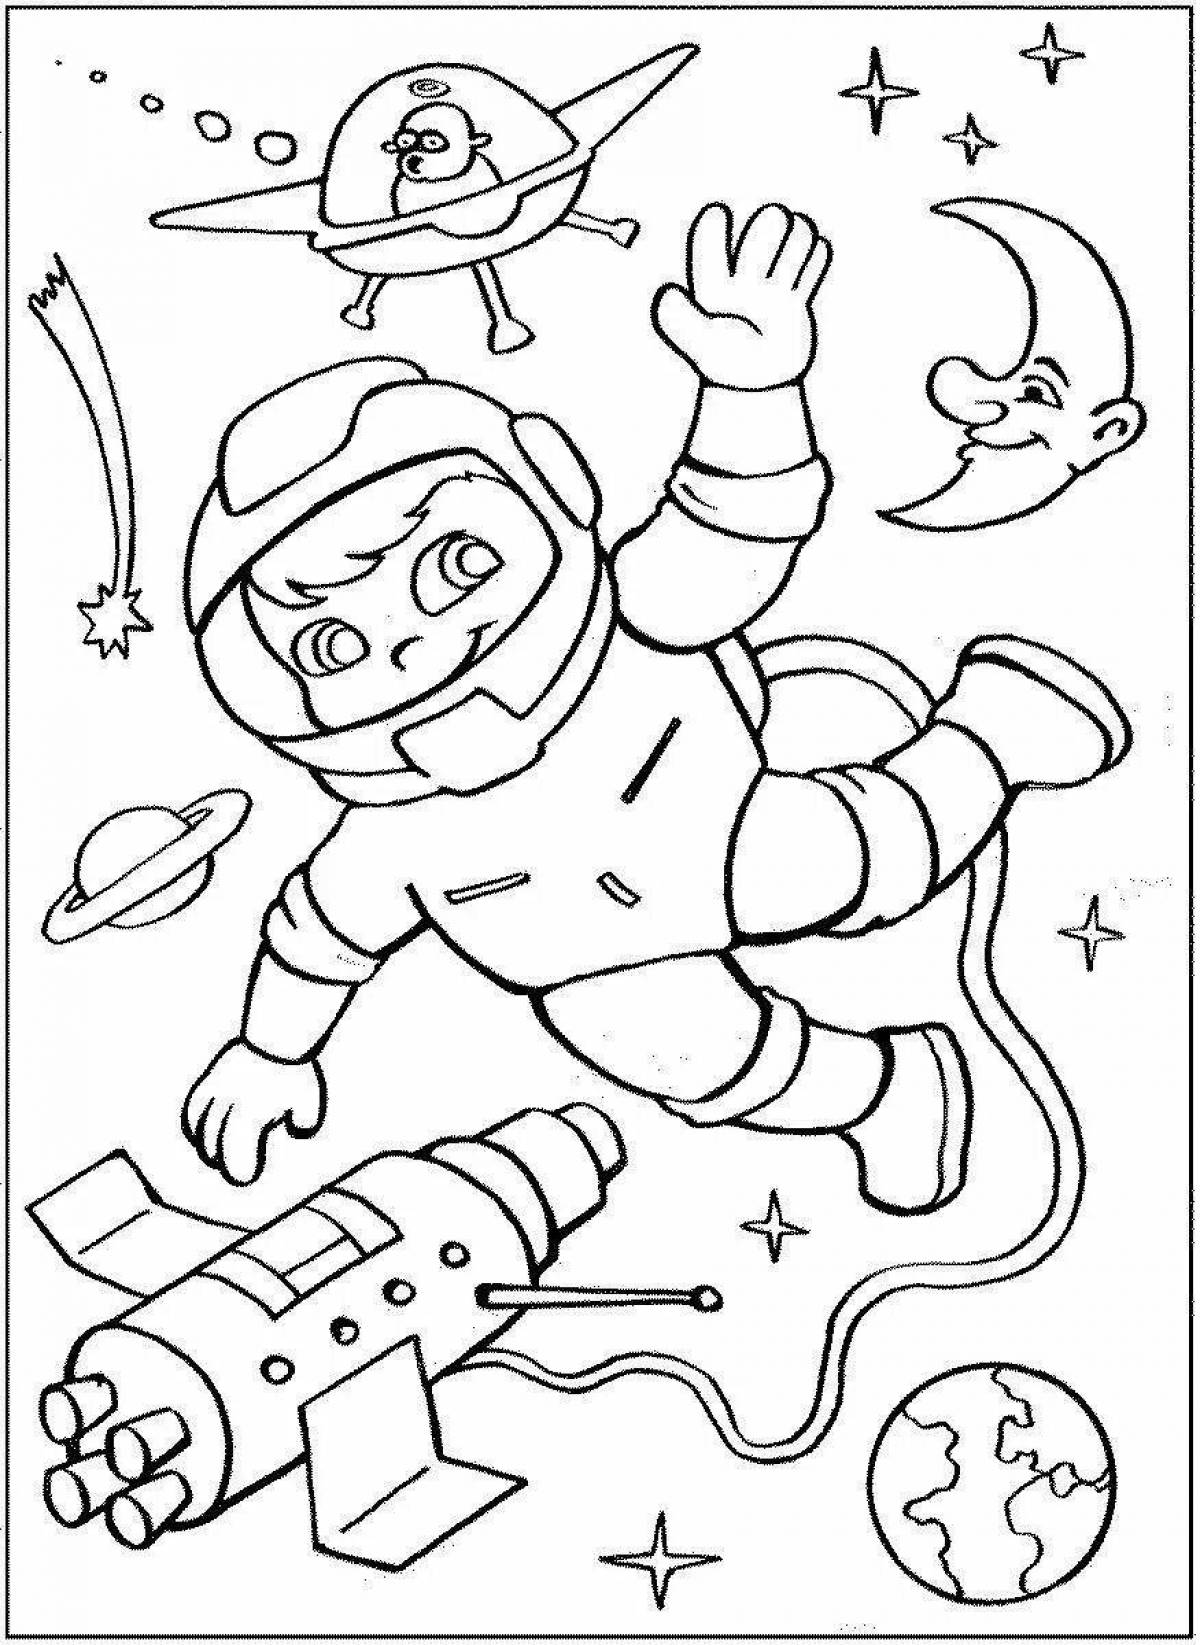 Colourful space coloring book for boys